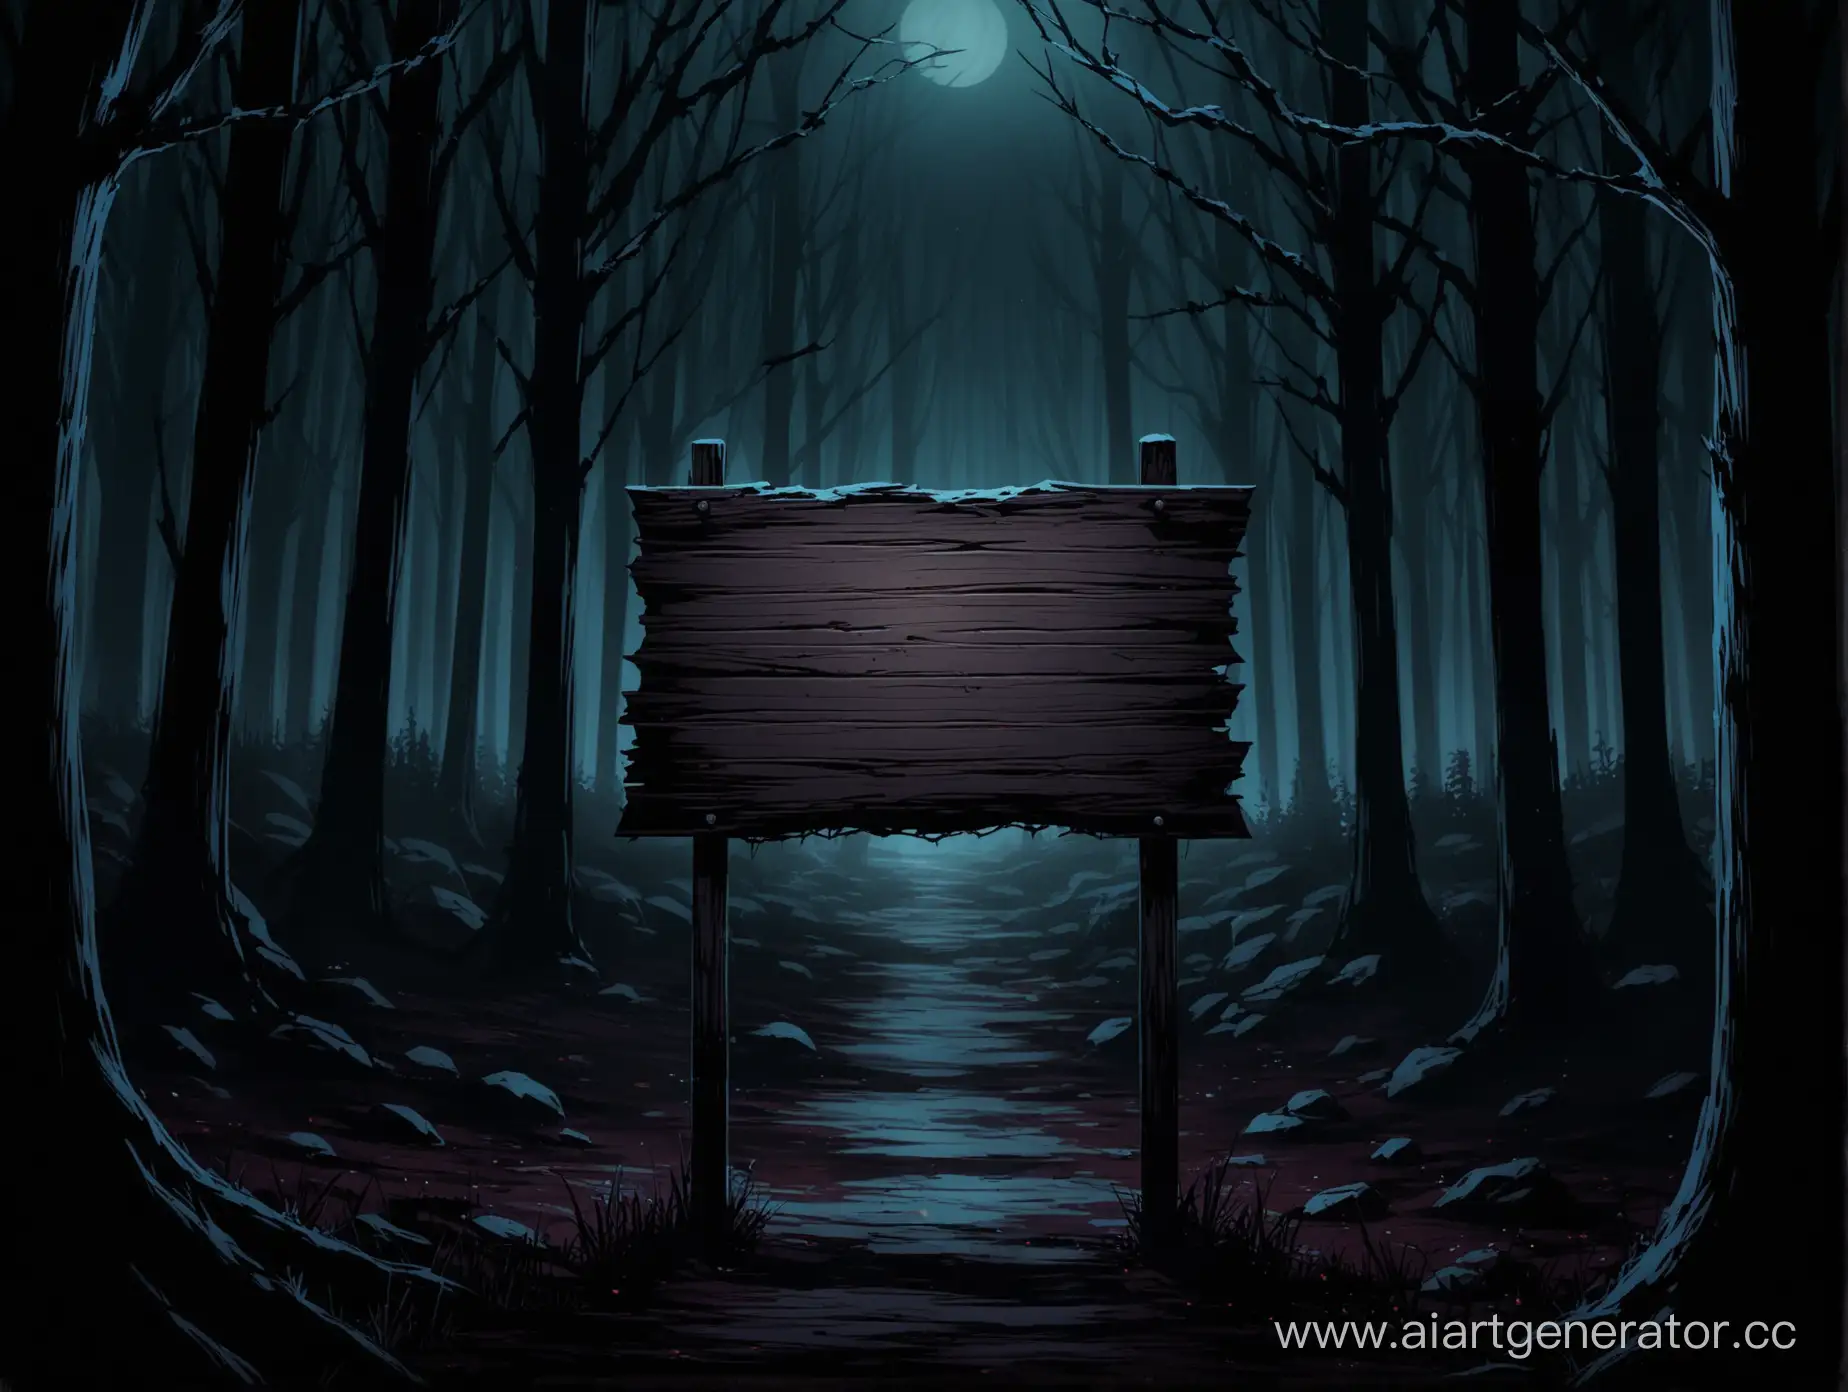 Empty-Wooden-Sign-in-a-Mysterious-Dark-Vampire-Forest